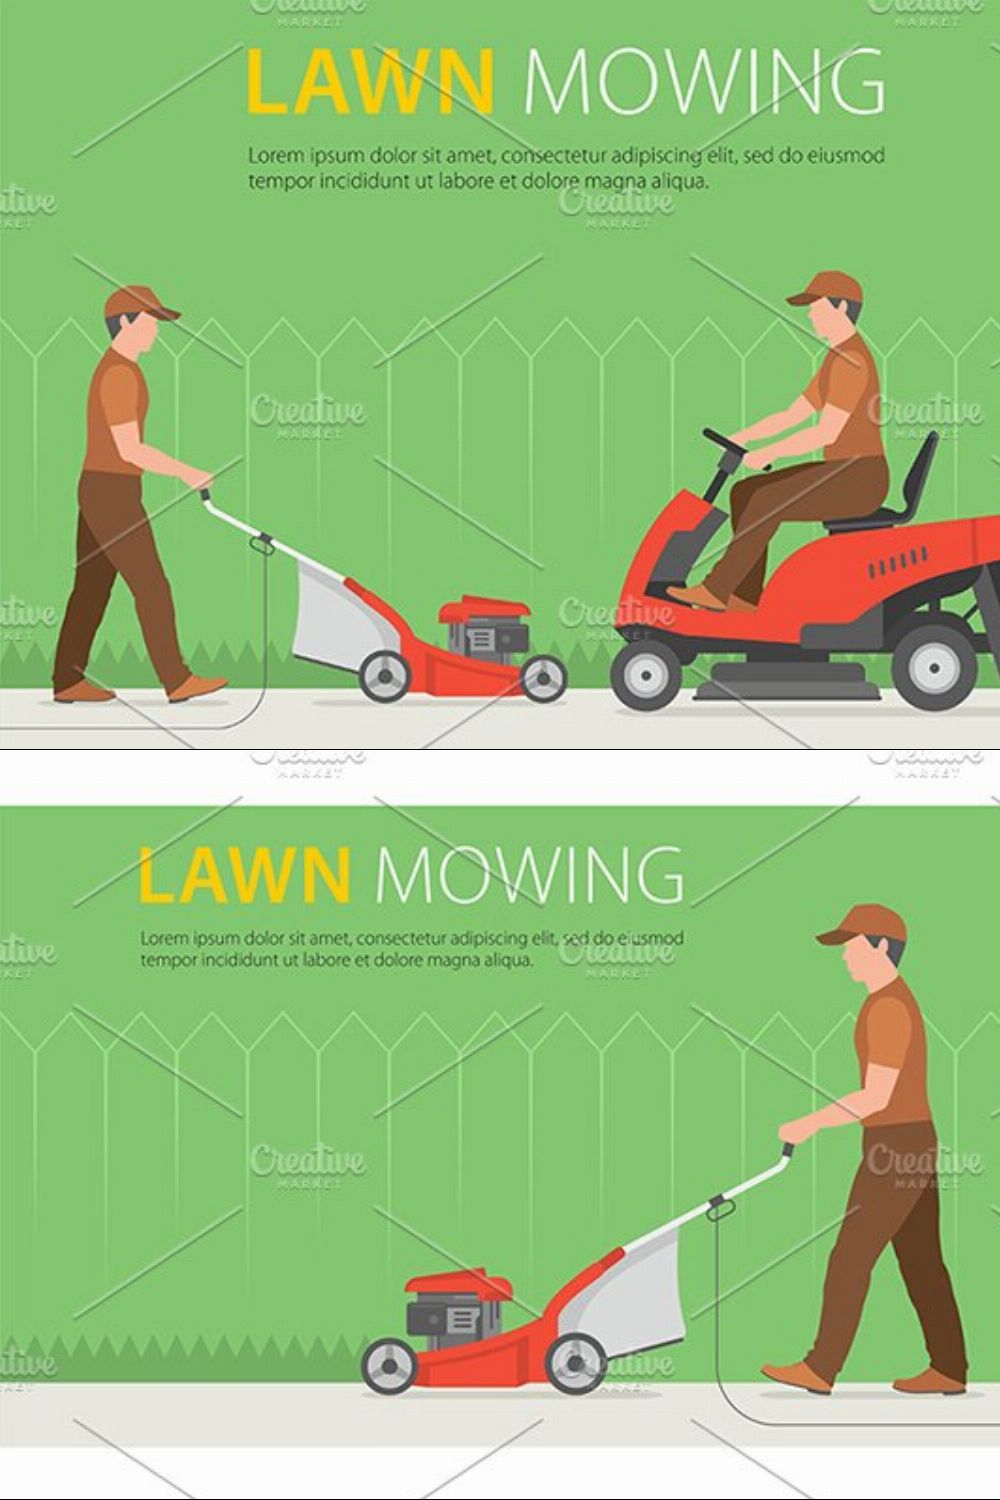 Man on tractor lawnmower pinterest preview image.